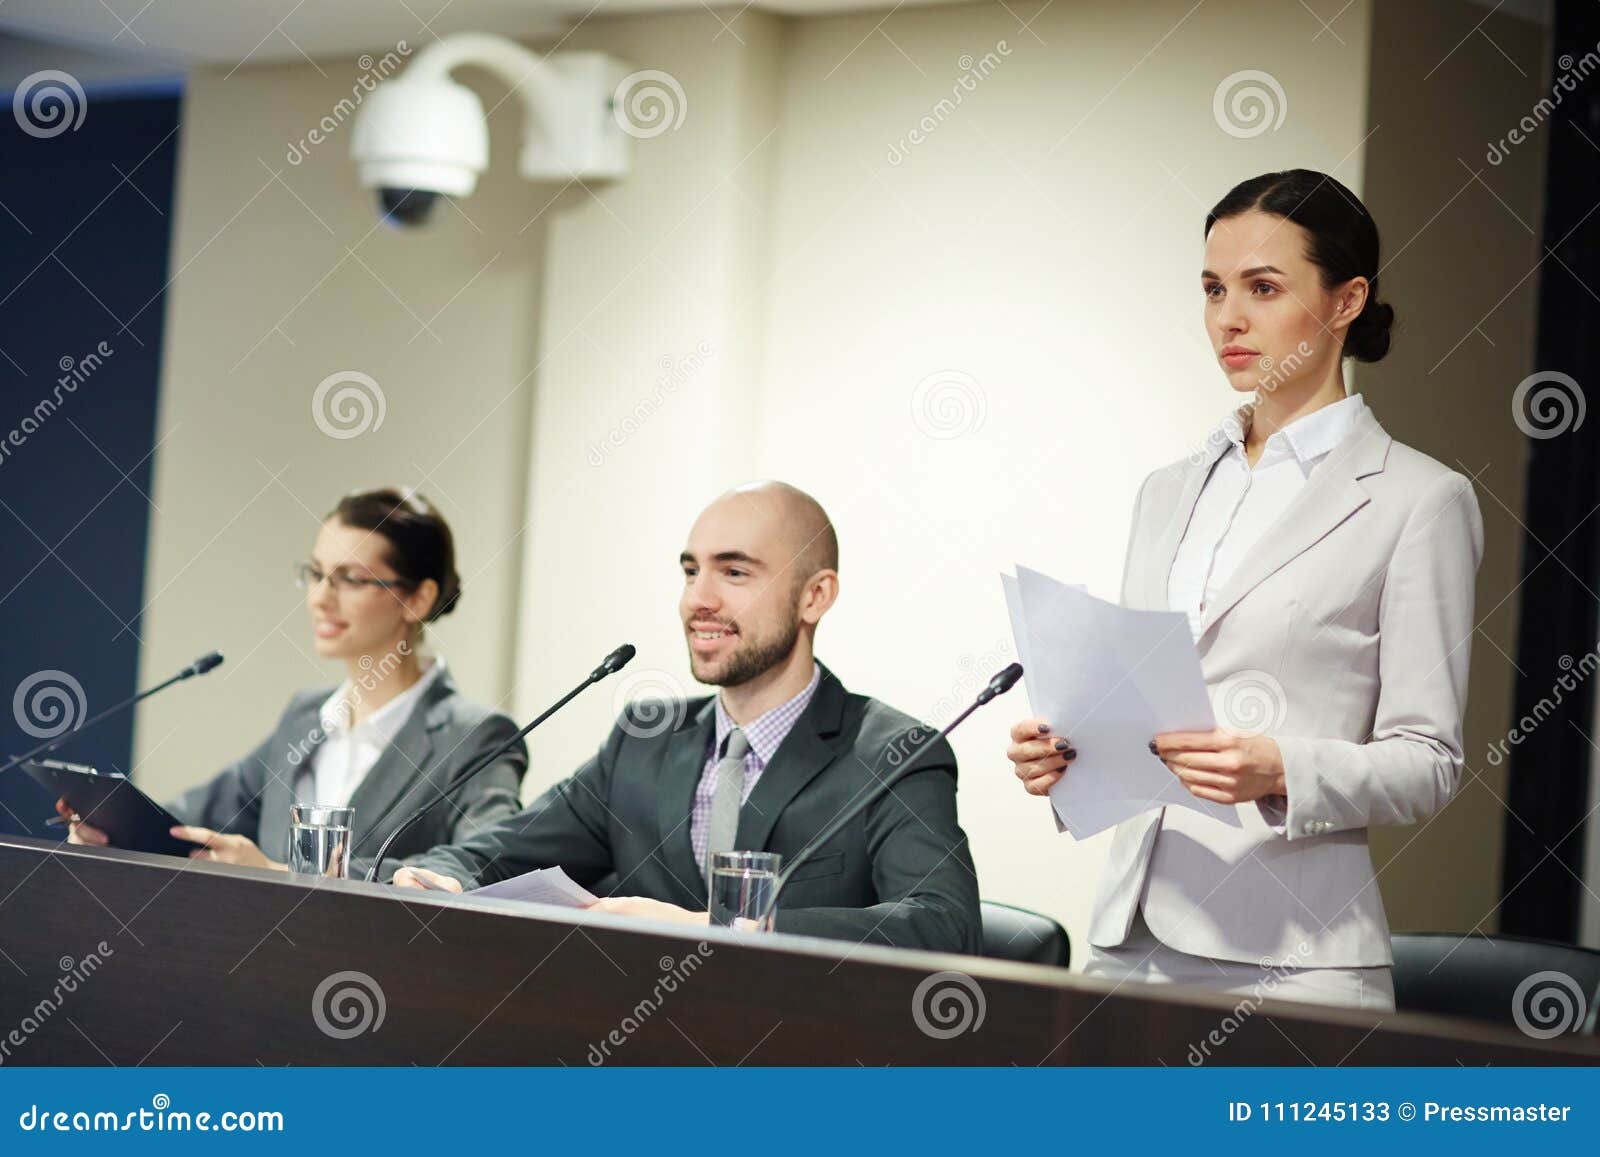 Speech at conference stock image. Image of expert, businesswoman